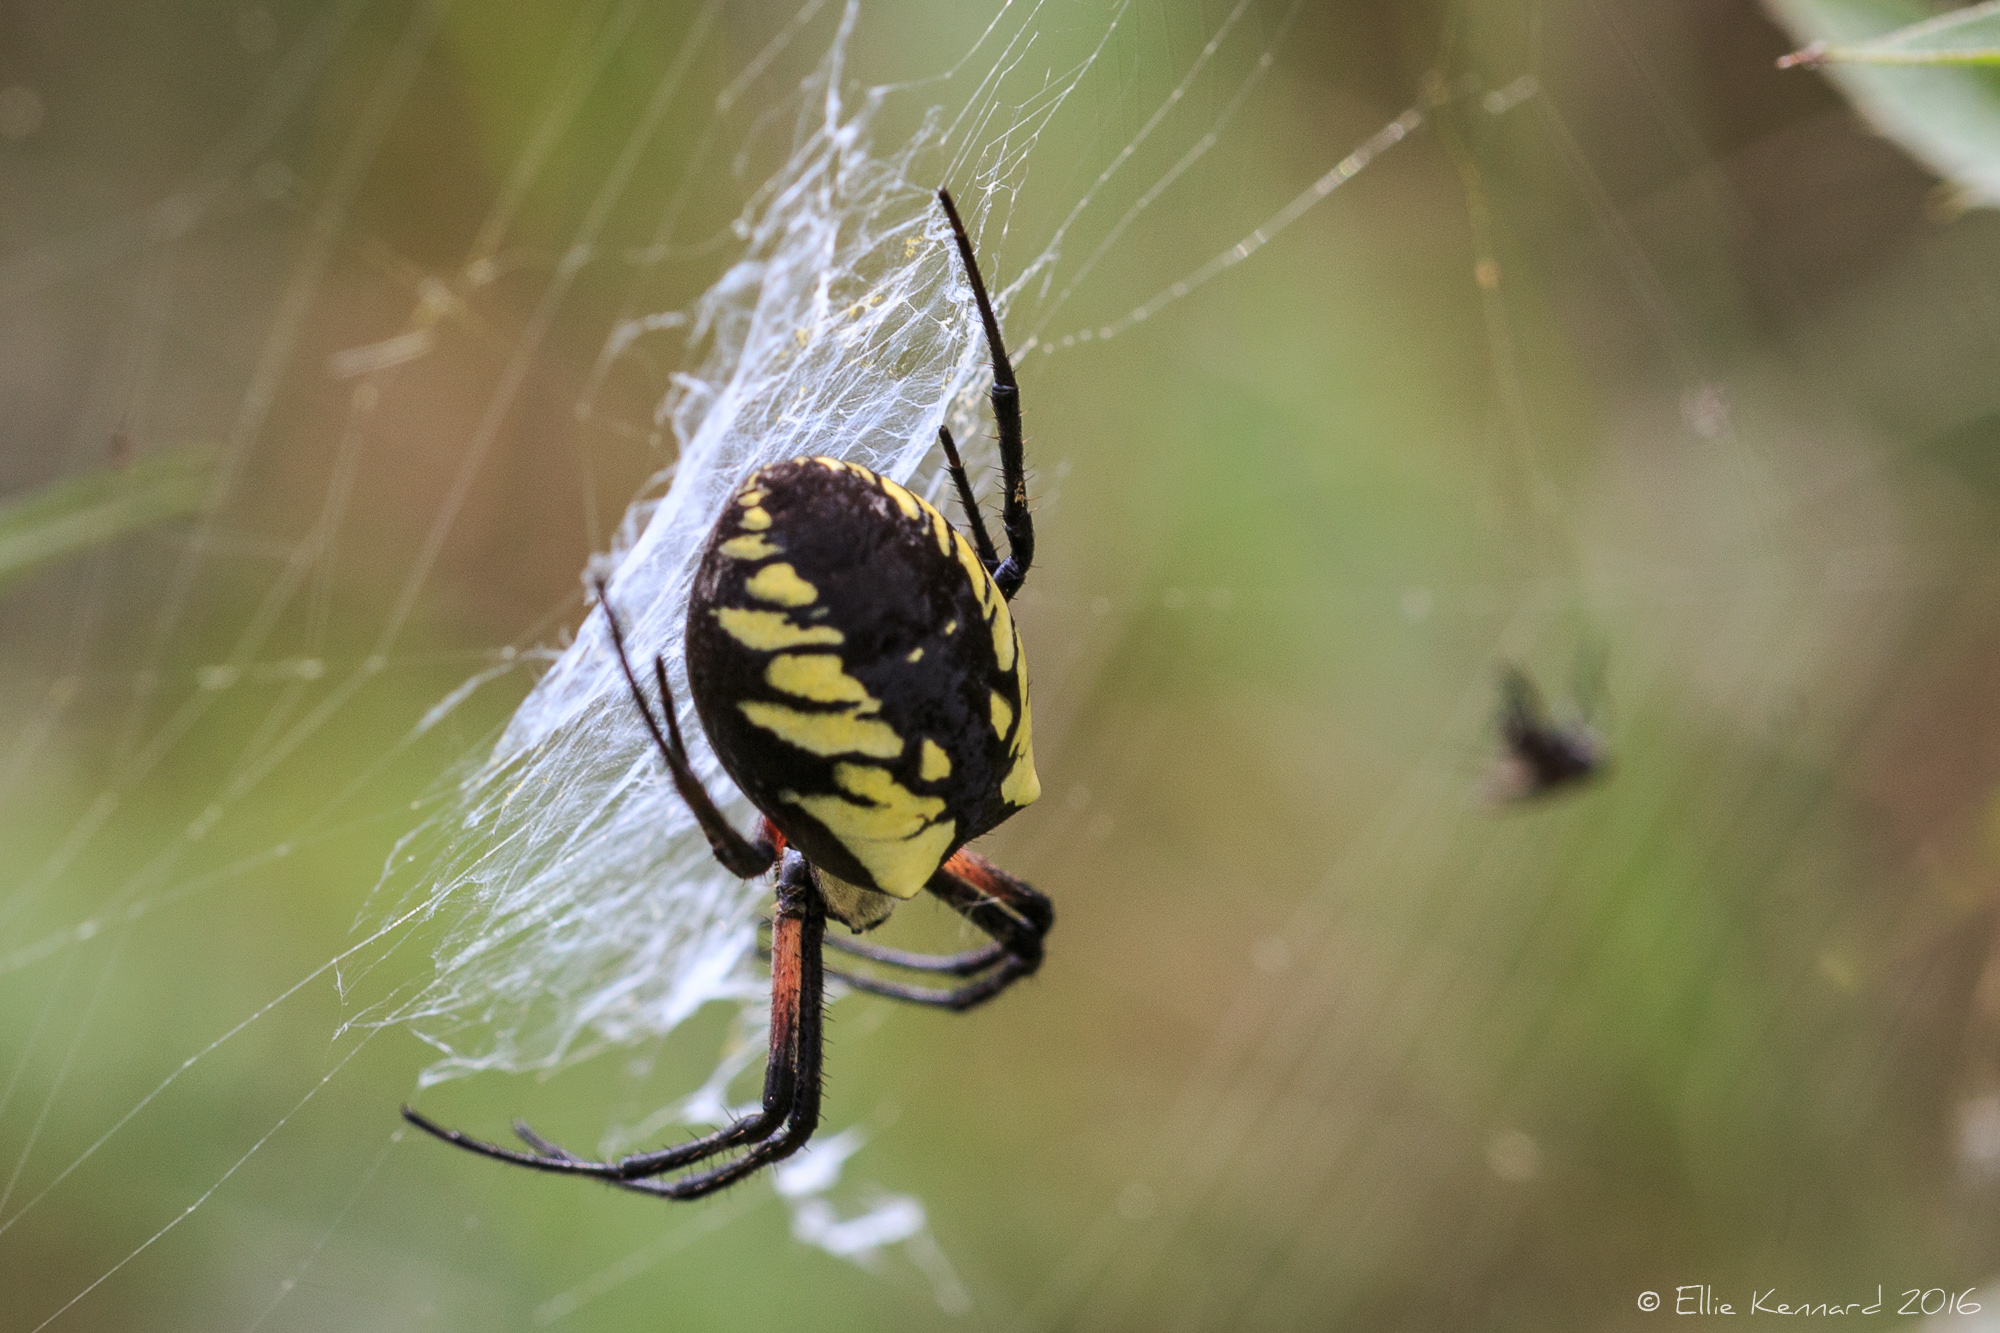 This is a female Yellow Argiope spider seen while photographing Monarch butterflies. People use a variety of other names like Garden spider or "Sewing Machine" spider, because of the zigzag she weaves in her web. The male is incredibly small in comparison. Canning - Ellie Kennard 2016